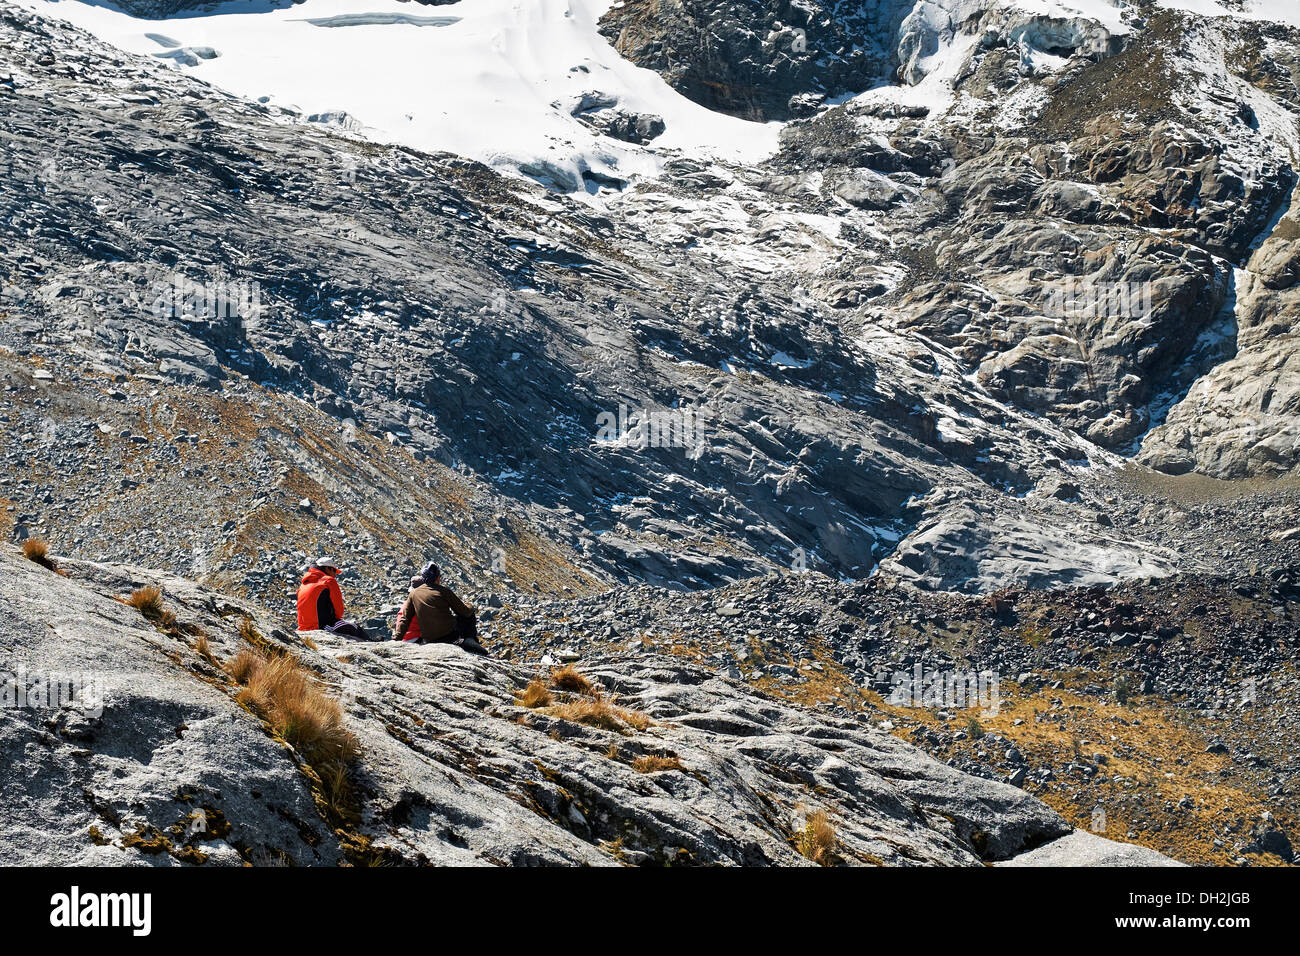 Hikers sitting below the Nev Churup Summit, Huascaran National Park in the Andes. Stock Photo